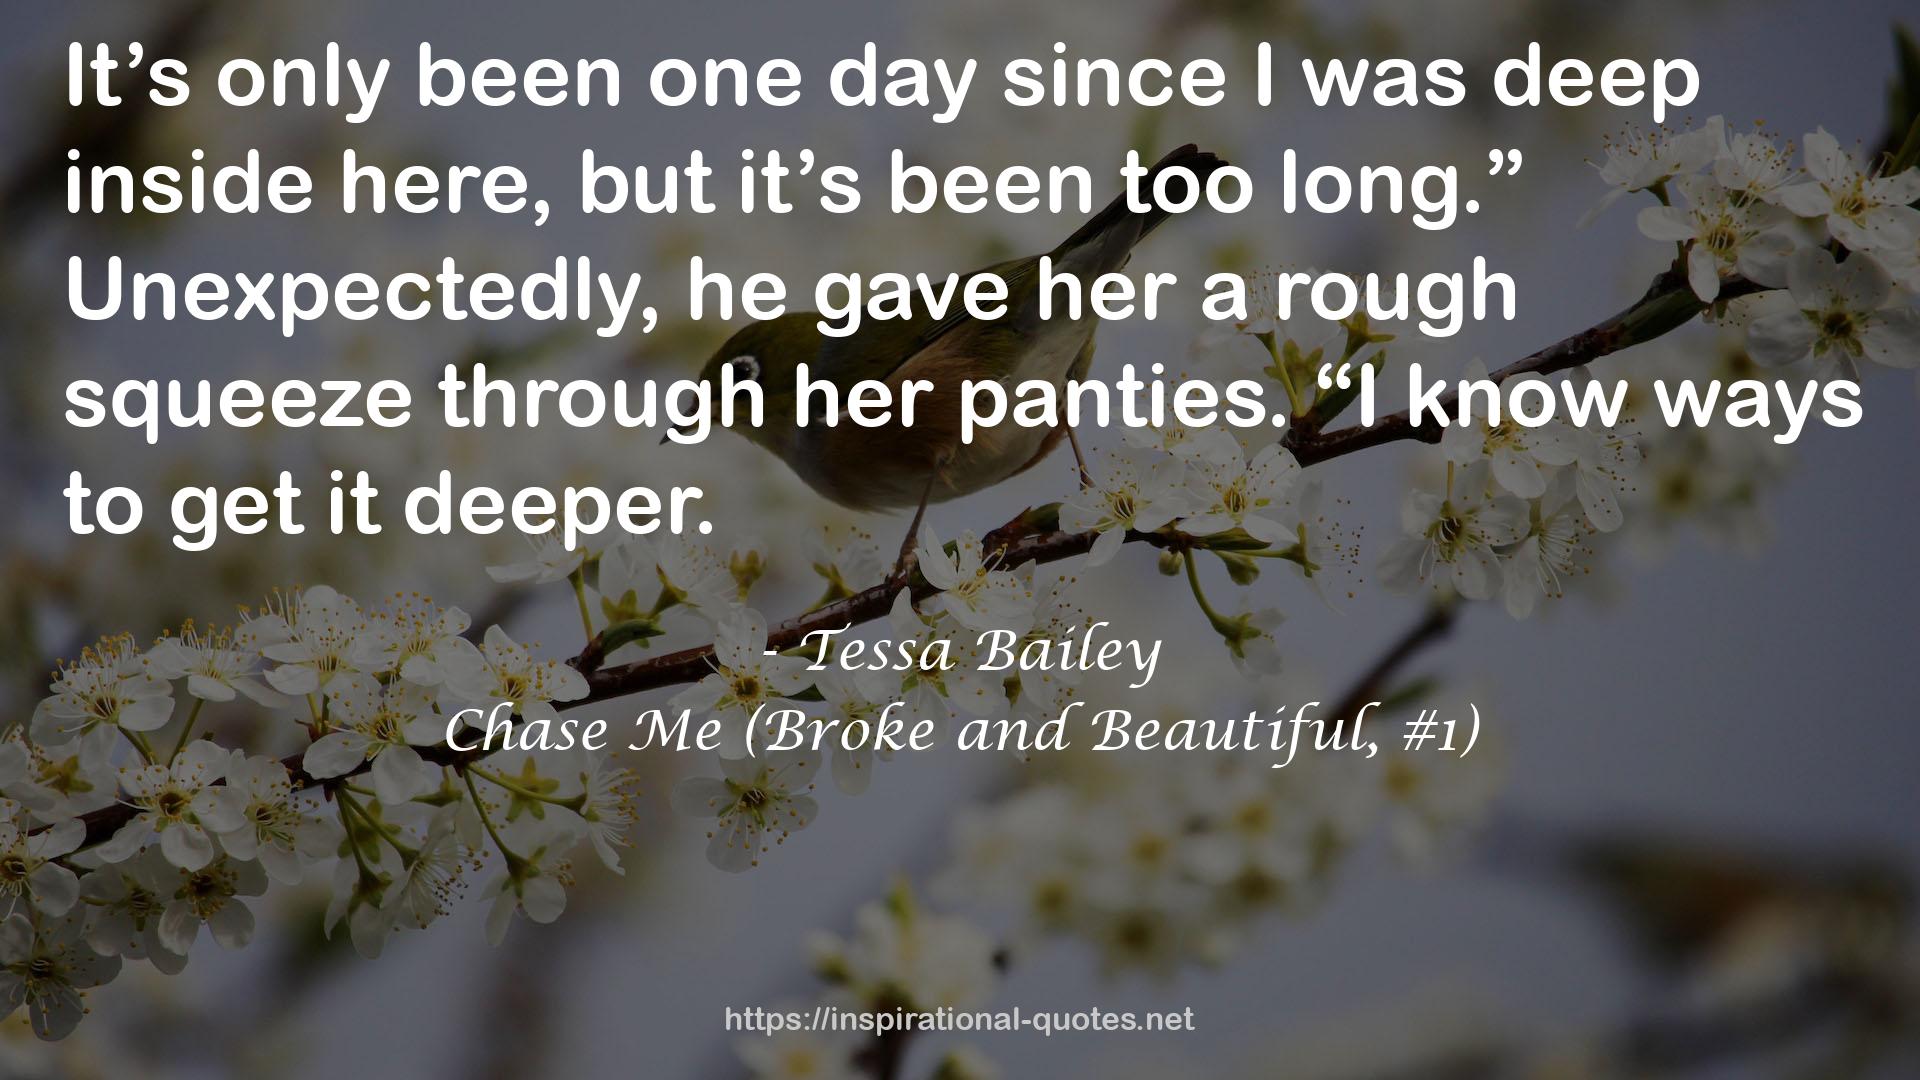 Chase Me (Broke and Beautiful, #1) QUOTES